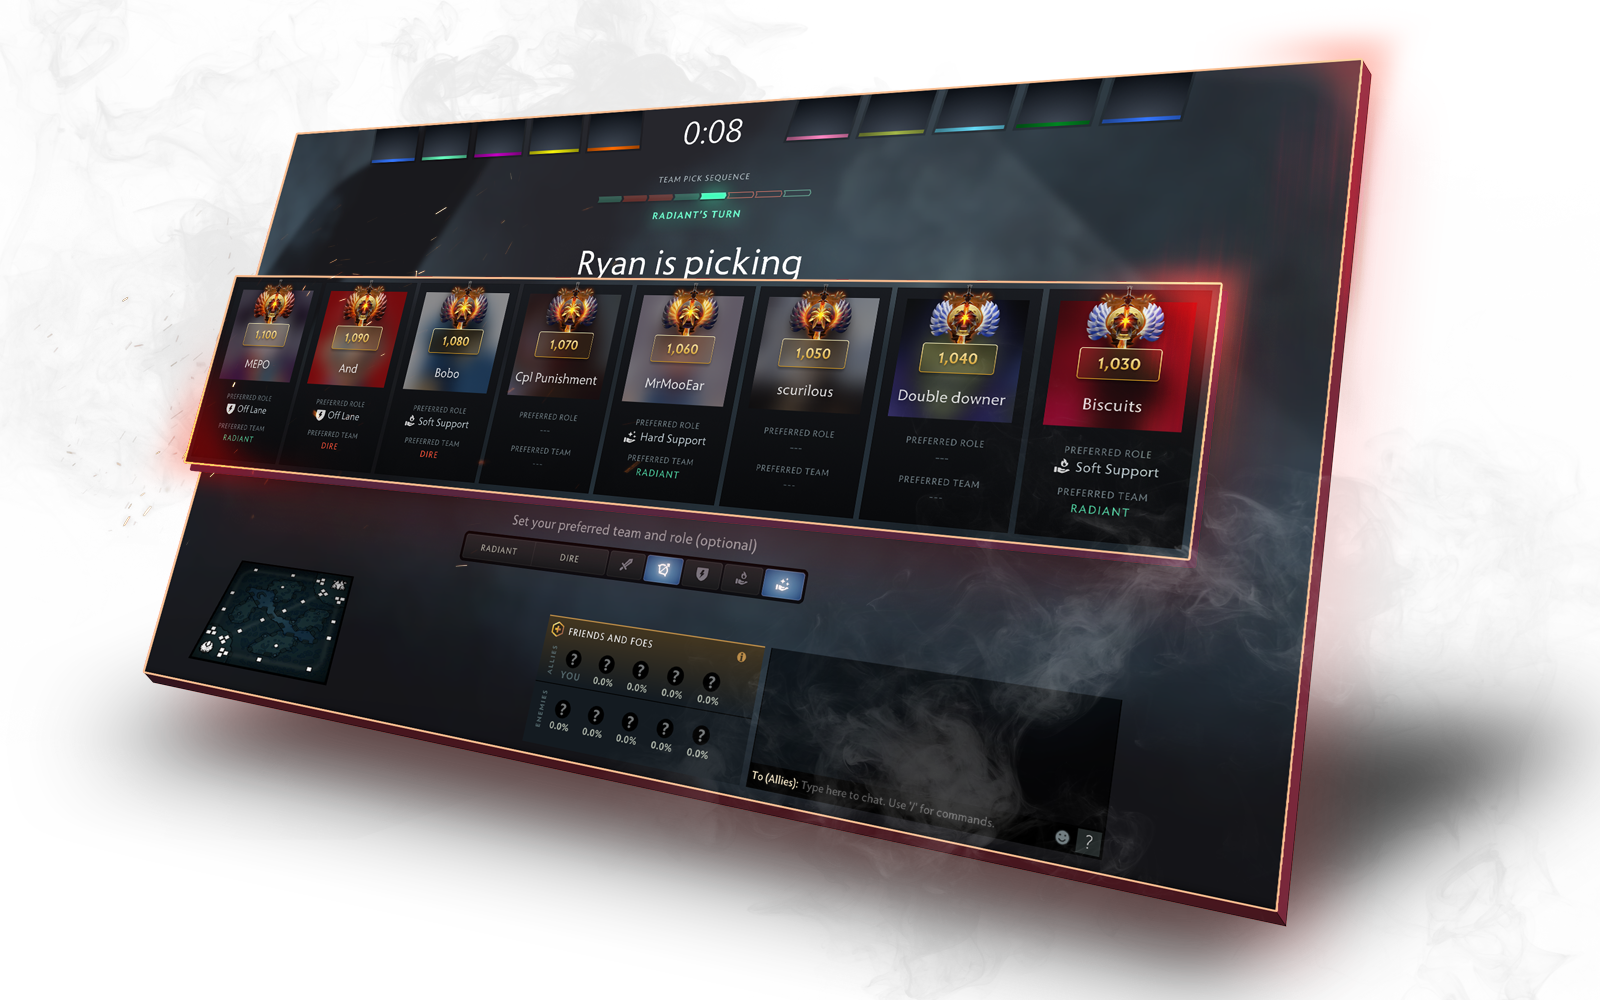 Black King Bar is reworked yet again in Dota 2 patch 7.33